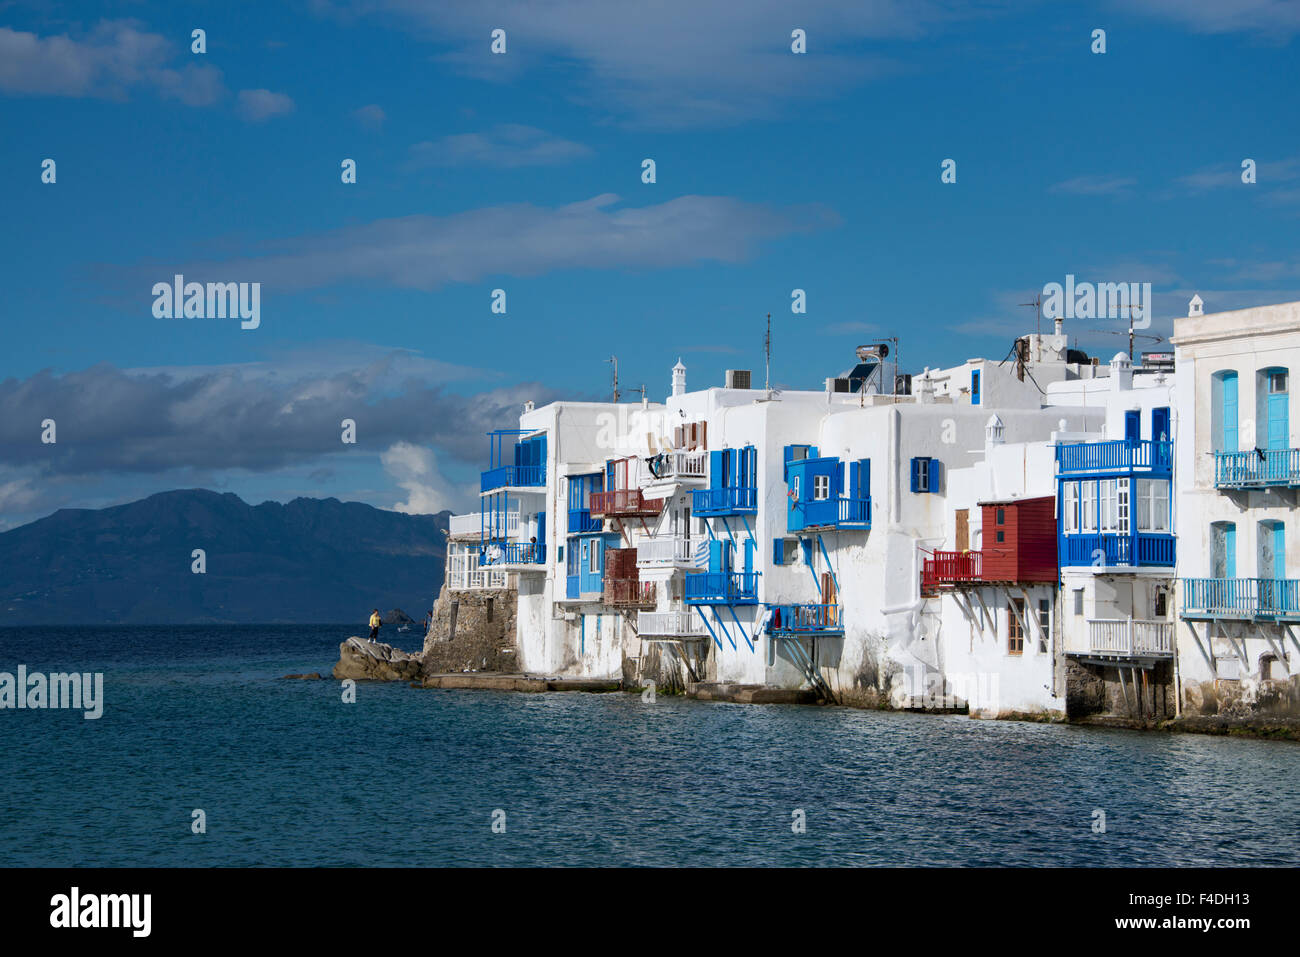 Greece, Cyclades, Mykonos, Hora. Little Venice area with its colorful houses along the Aegean Sea. (Large format sizes available). Stock Photo